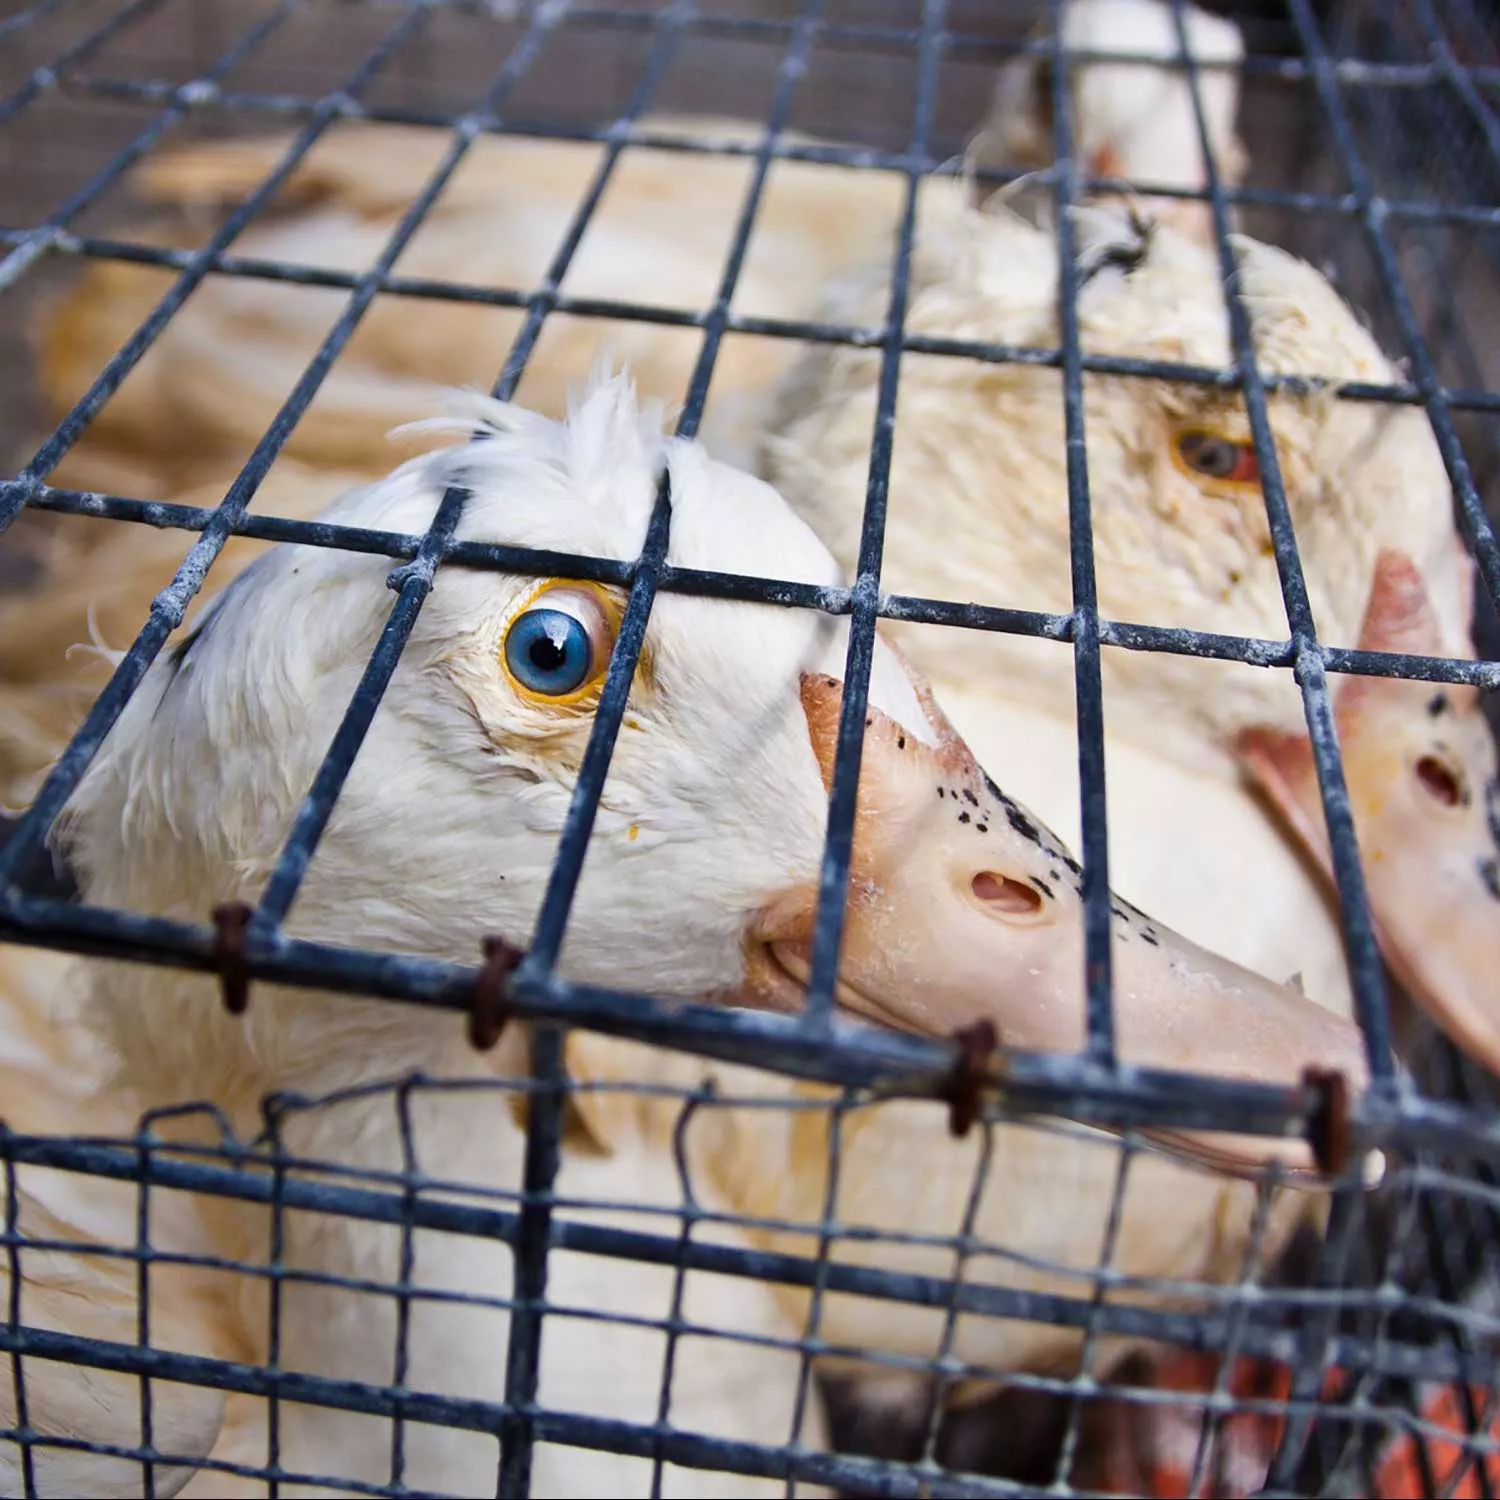 Campaign launched to ban foie gras sales in Ann Arbor, Michigan